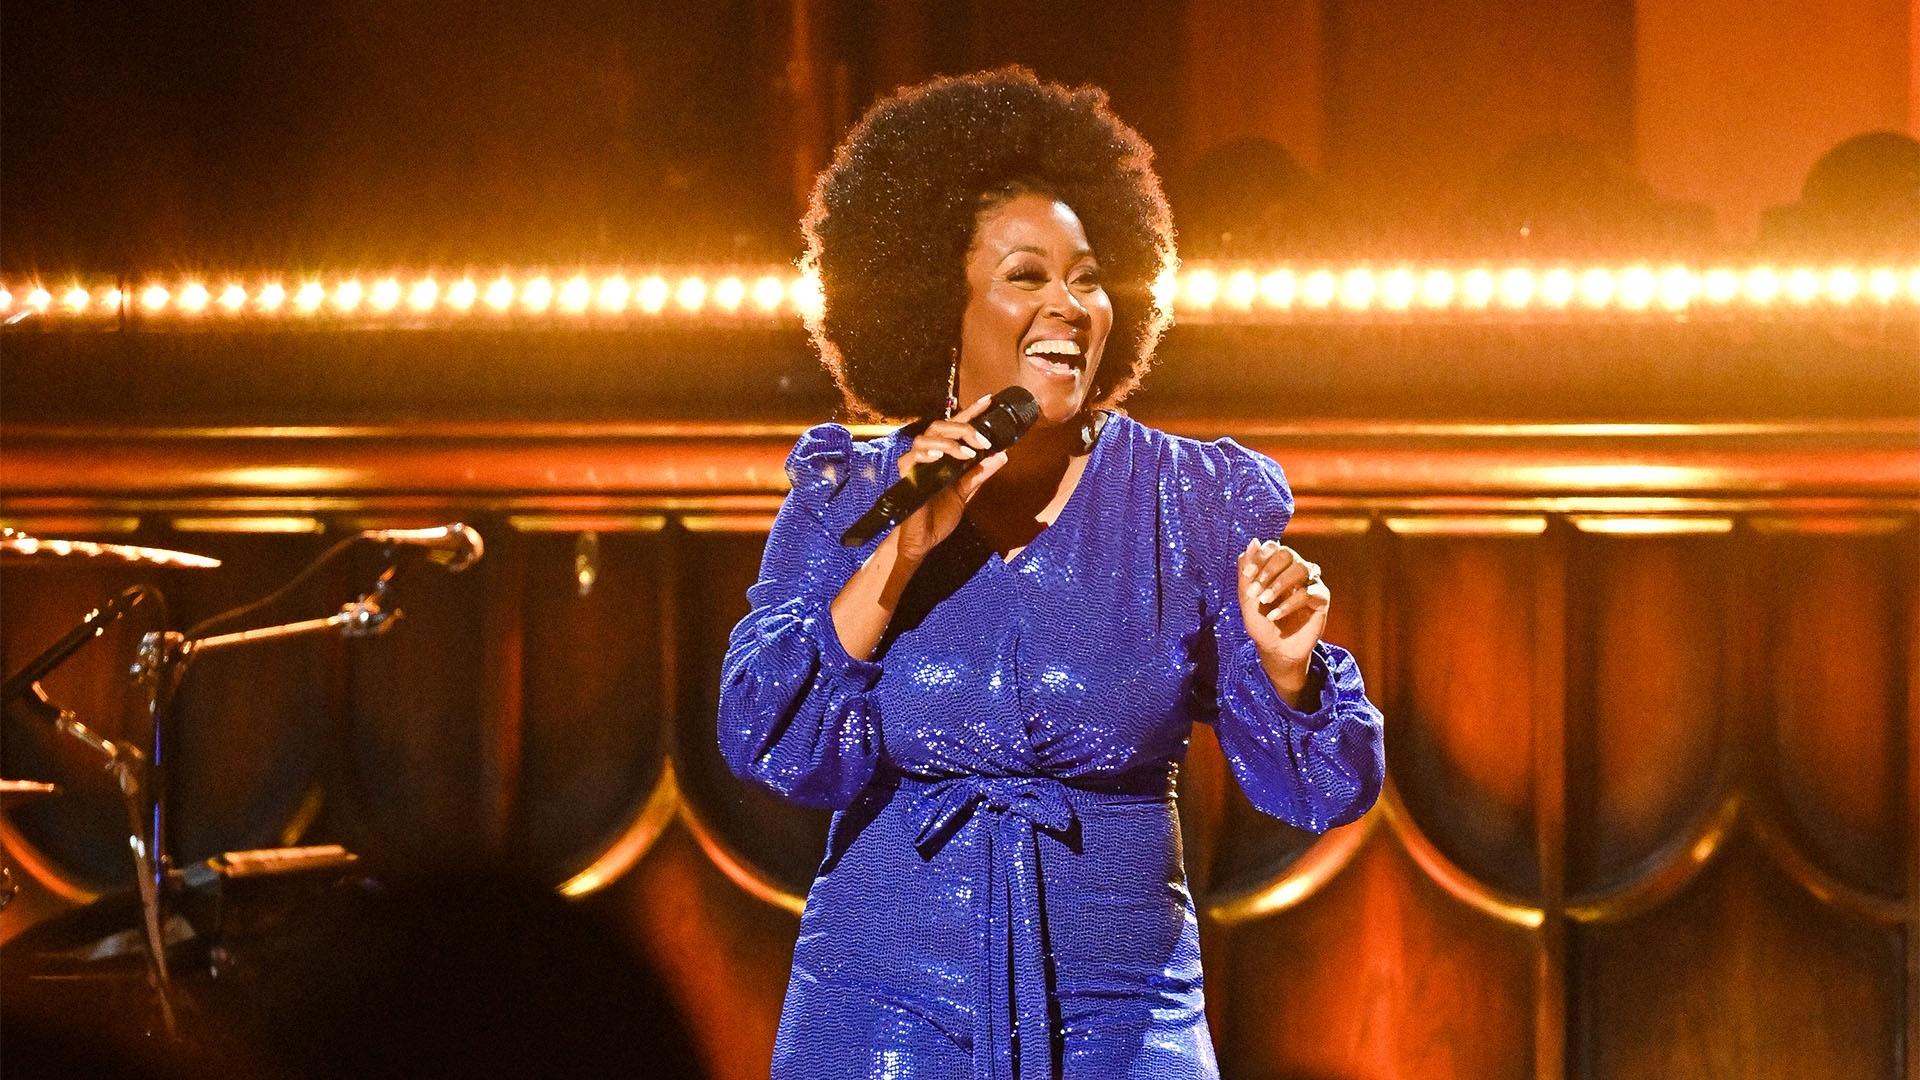 A Black woman with Black curly short hair in a blue dress sings on stage.